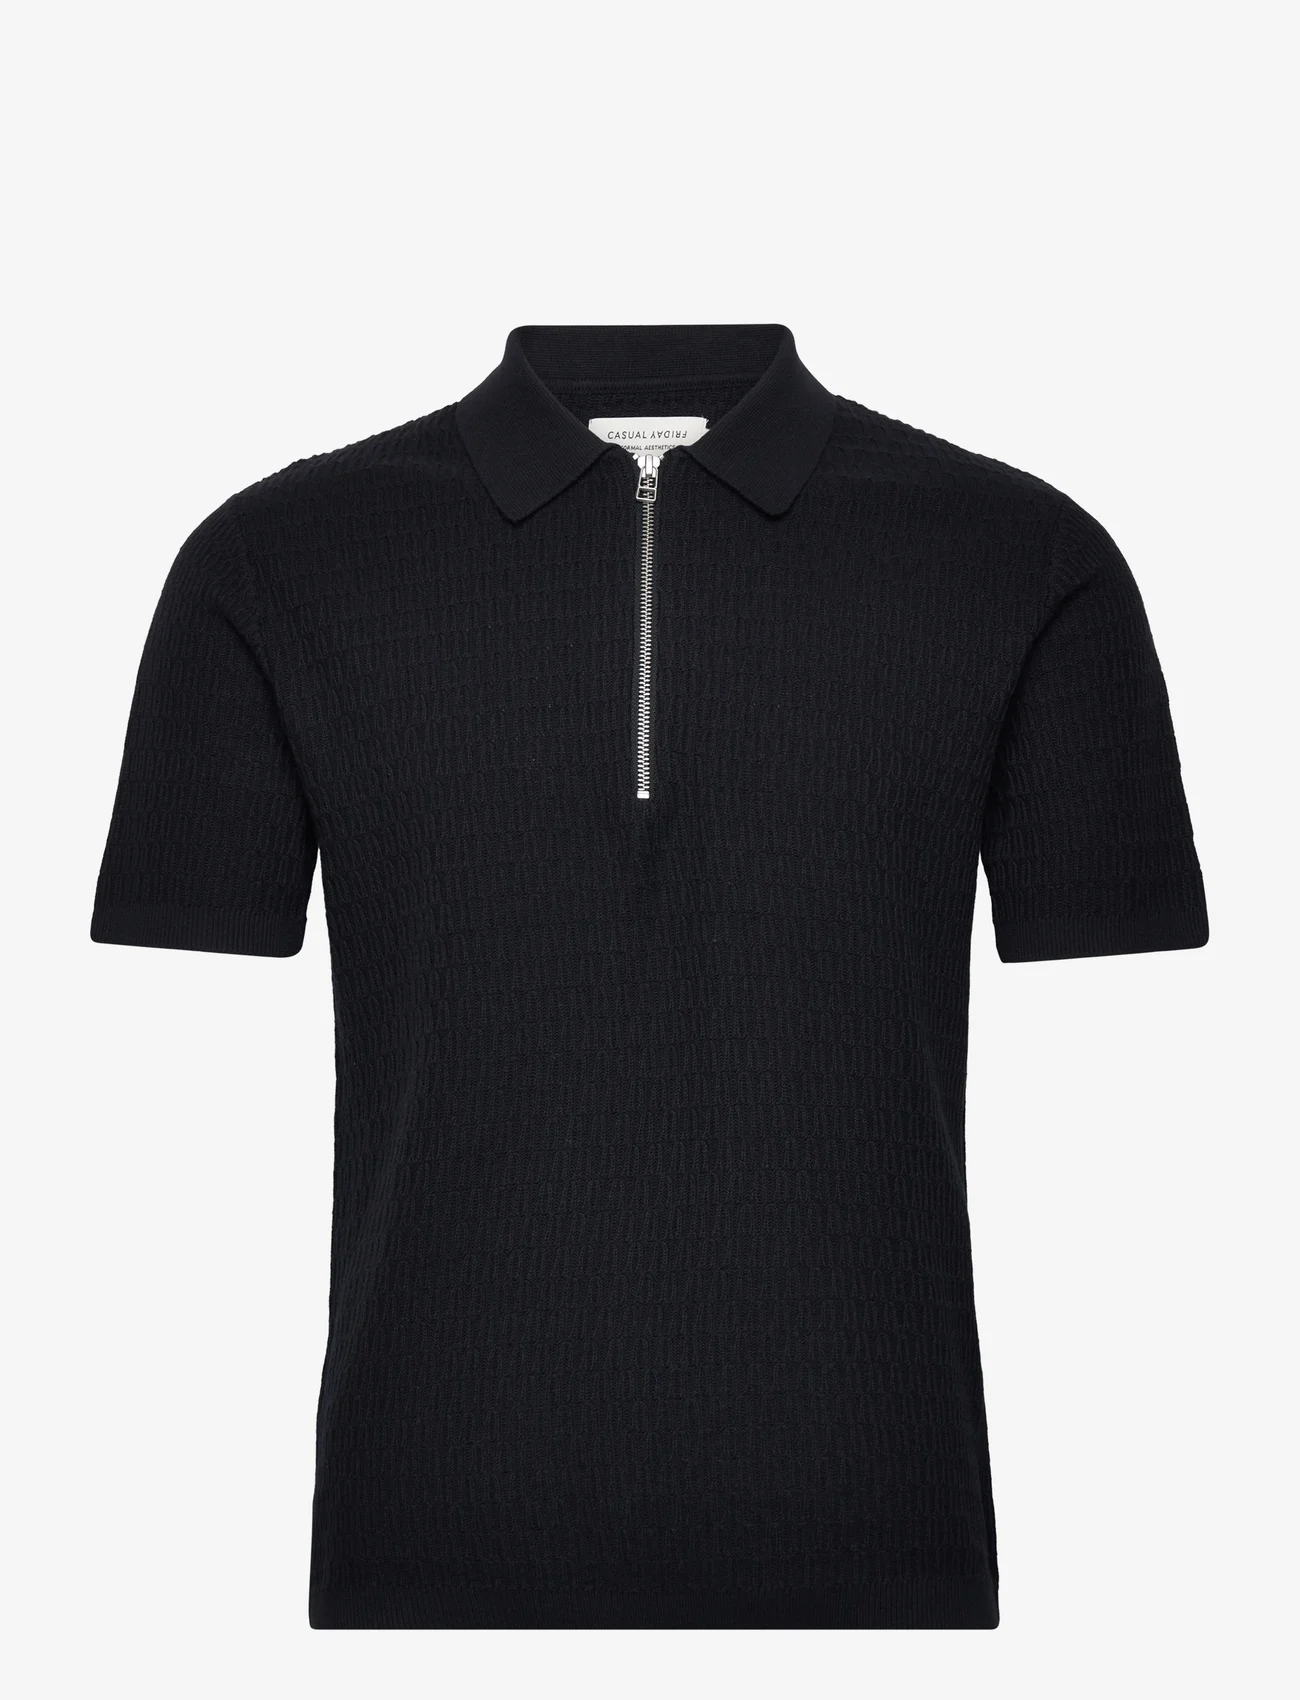 Casual Friday - CFKarl SS structured polo knit - heren - dark navy - 0